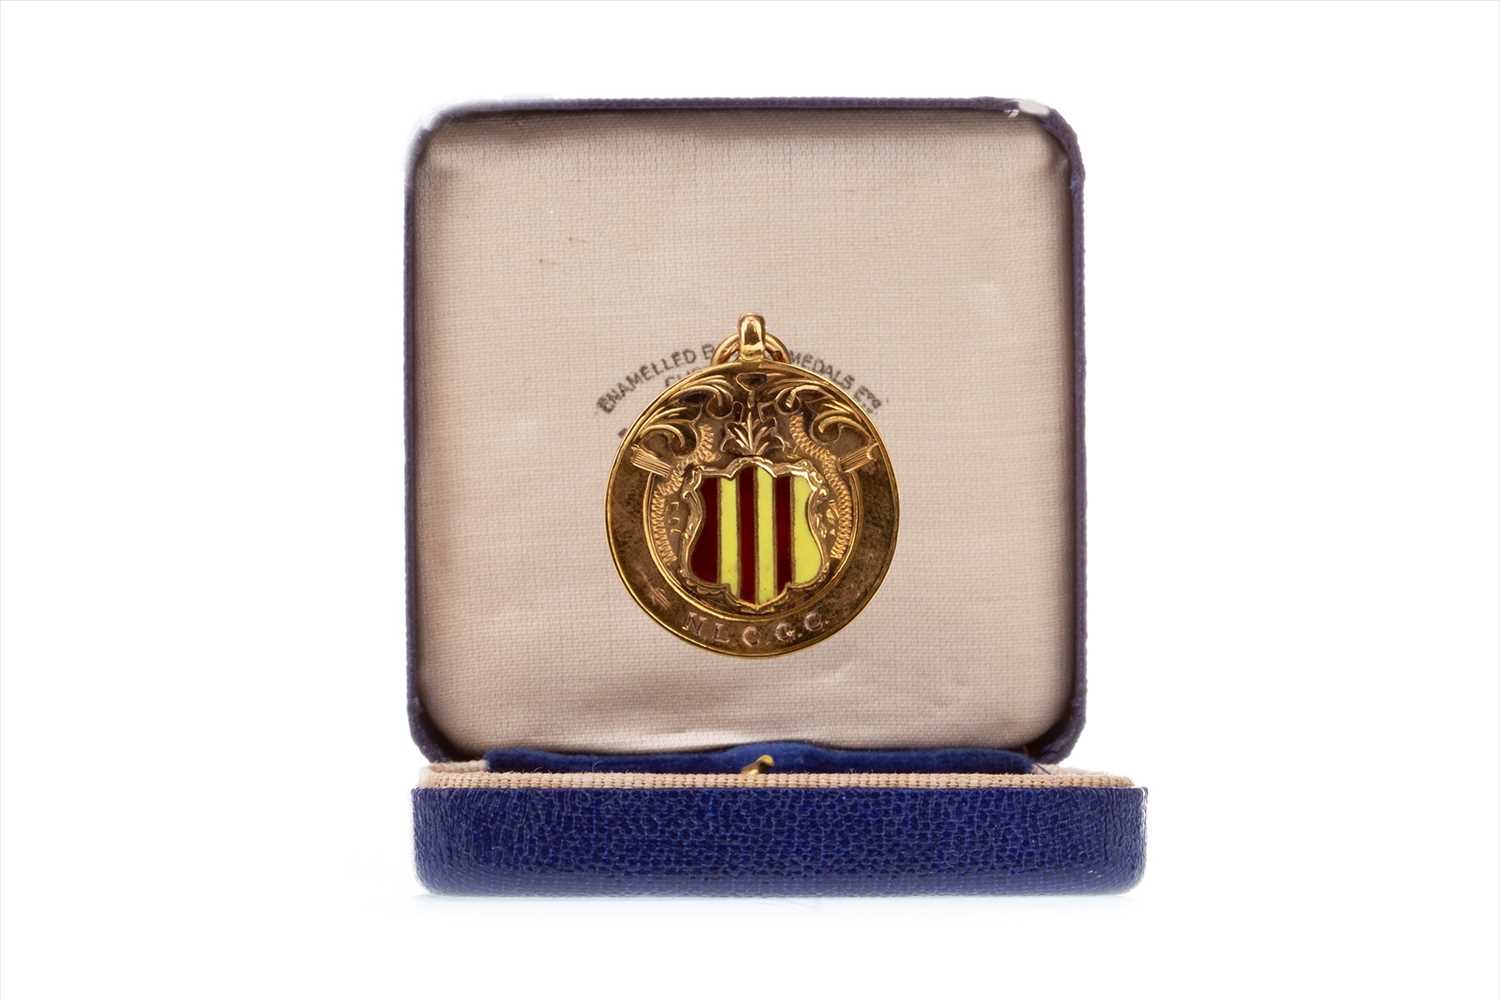 Lot 1727 - A NORTHUMBERLAND LADIES COUNTY GOLF ASSOCIATION GOLD MEDAL 1938